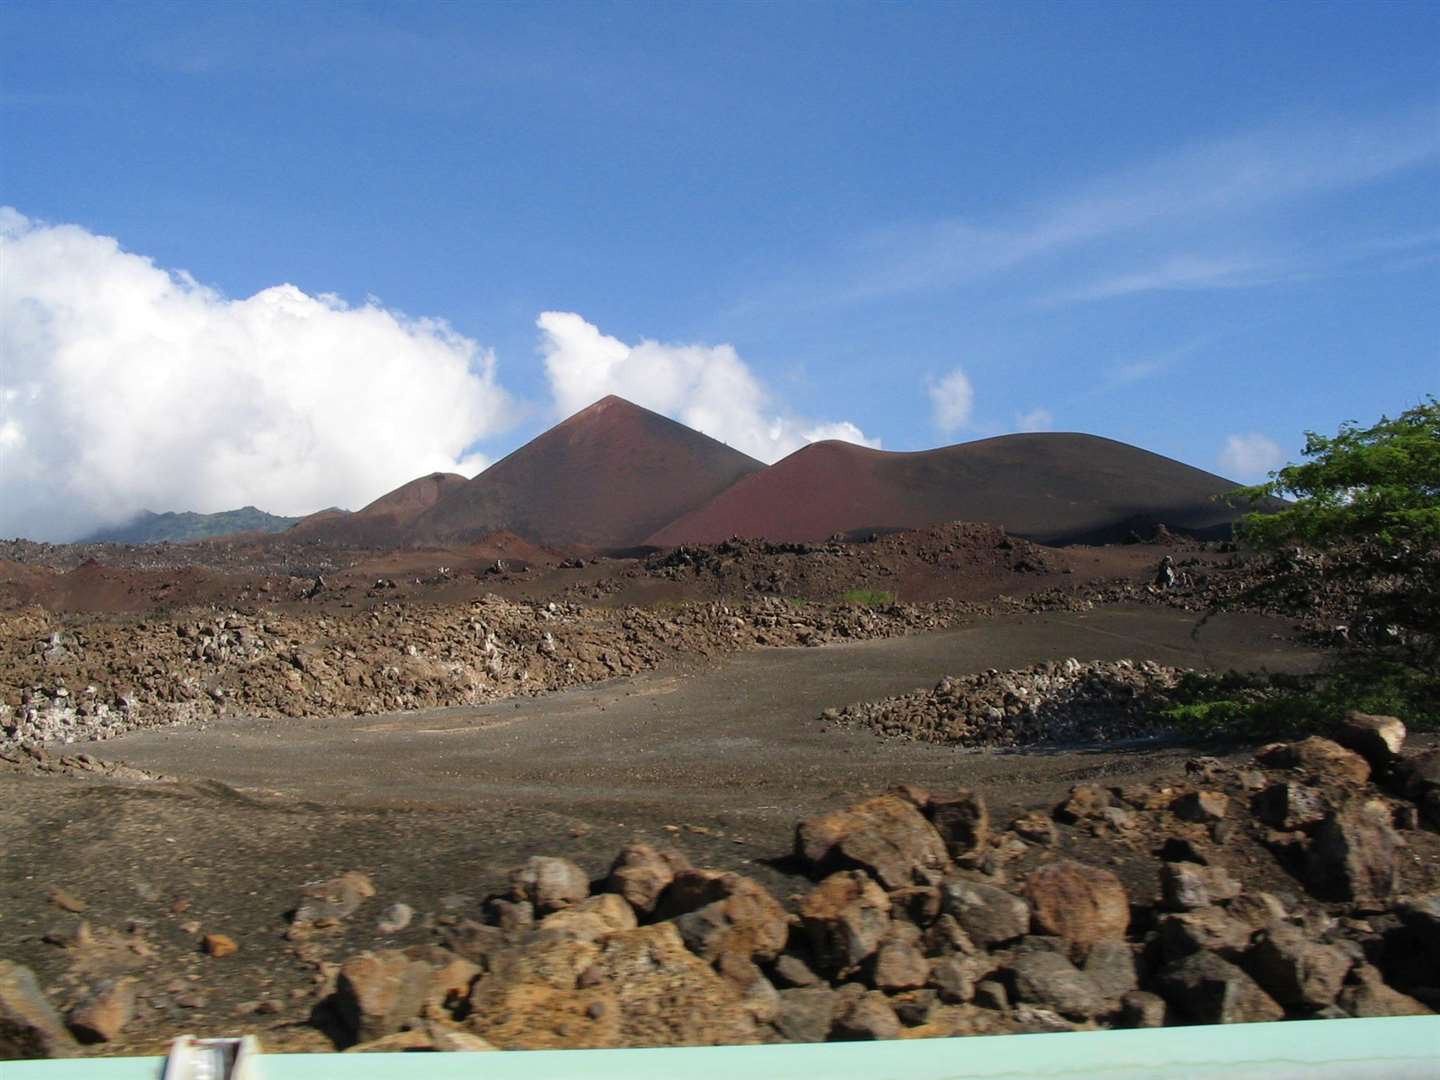 Ascension Island has around 800 inhabitants and is based in the mid-Atlantic